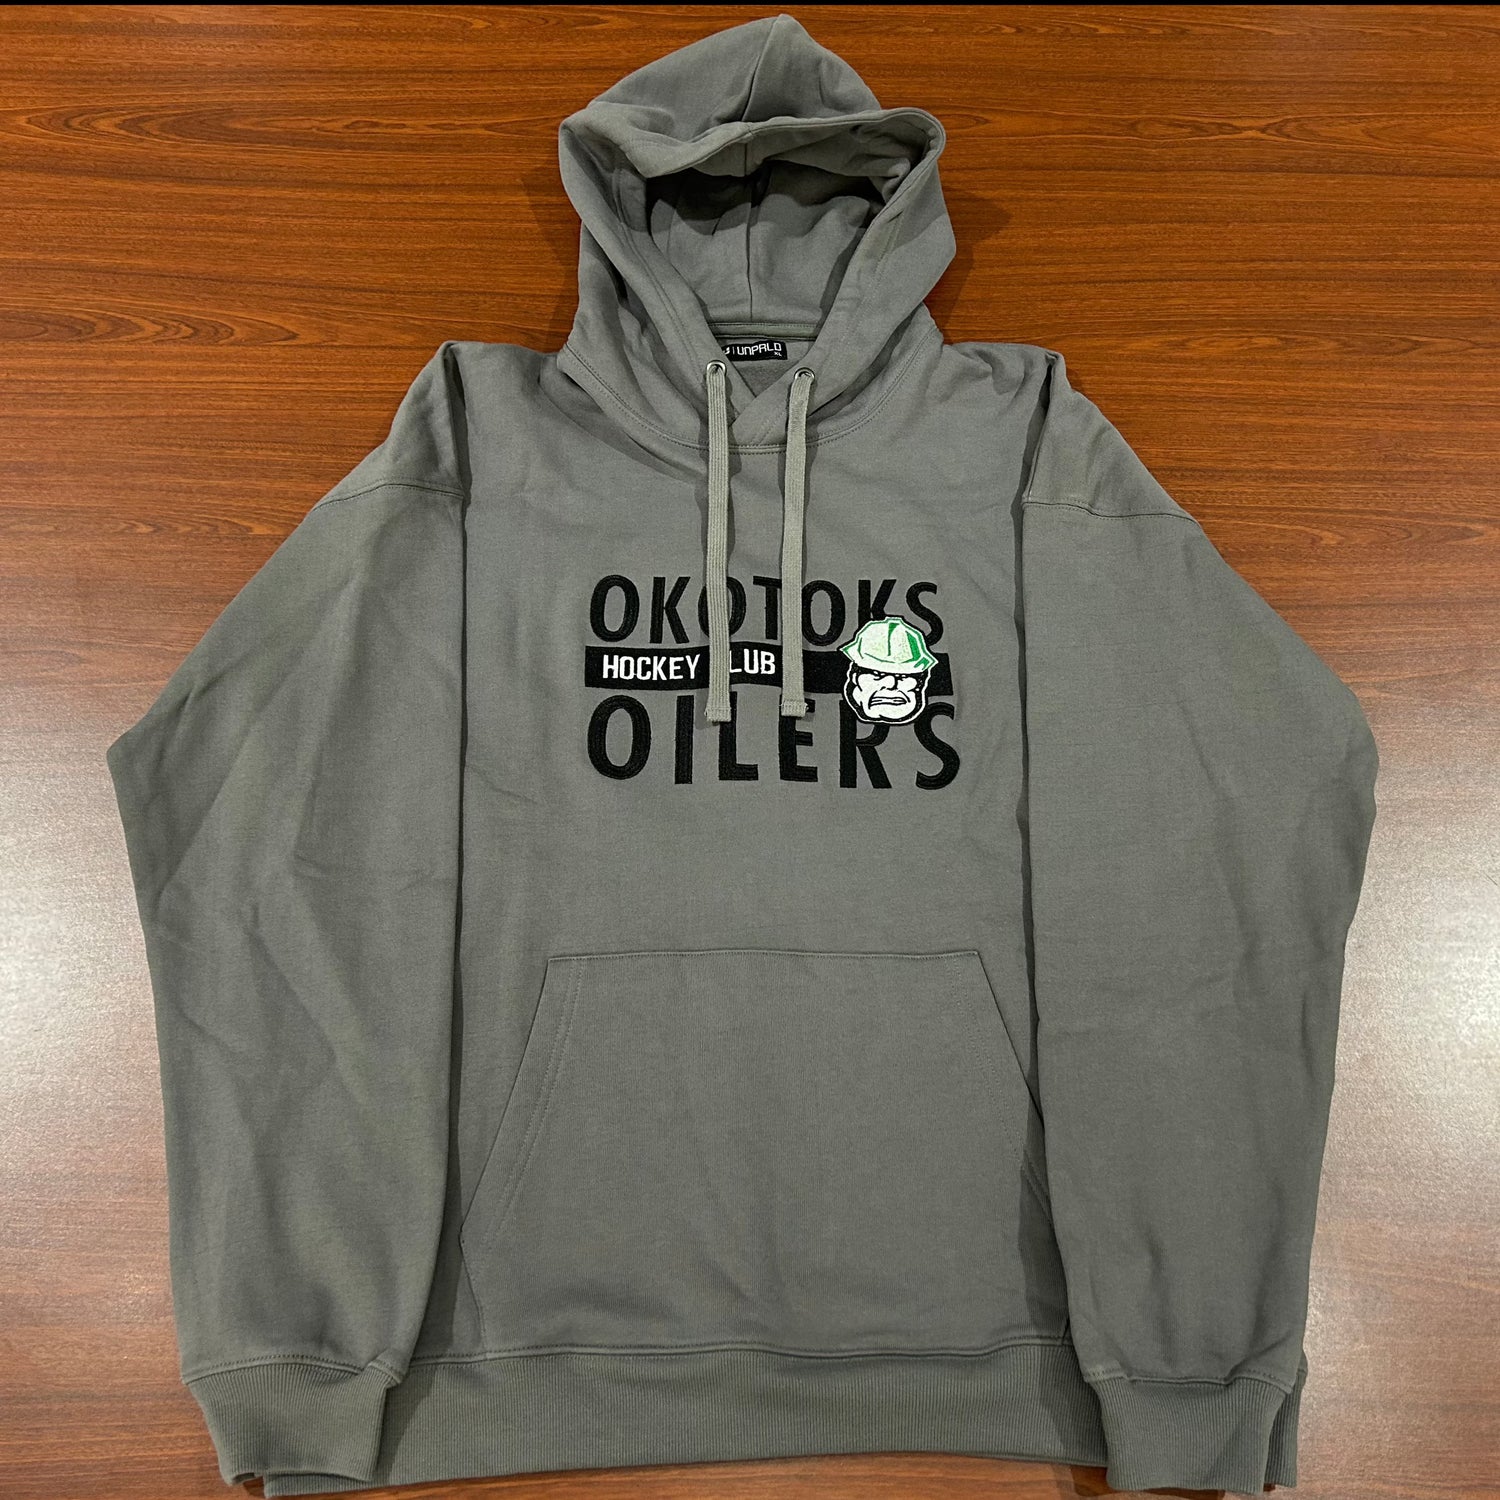 Grey hoodie with OKOTOKS OILERS HOCKEY CLUB and the Okotoks Oilers' Rigger head logo embroidered on the chest. The hoodie also has a grey drawstring.